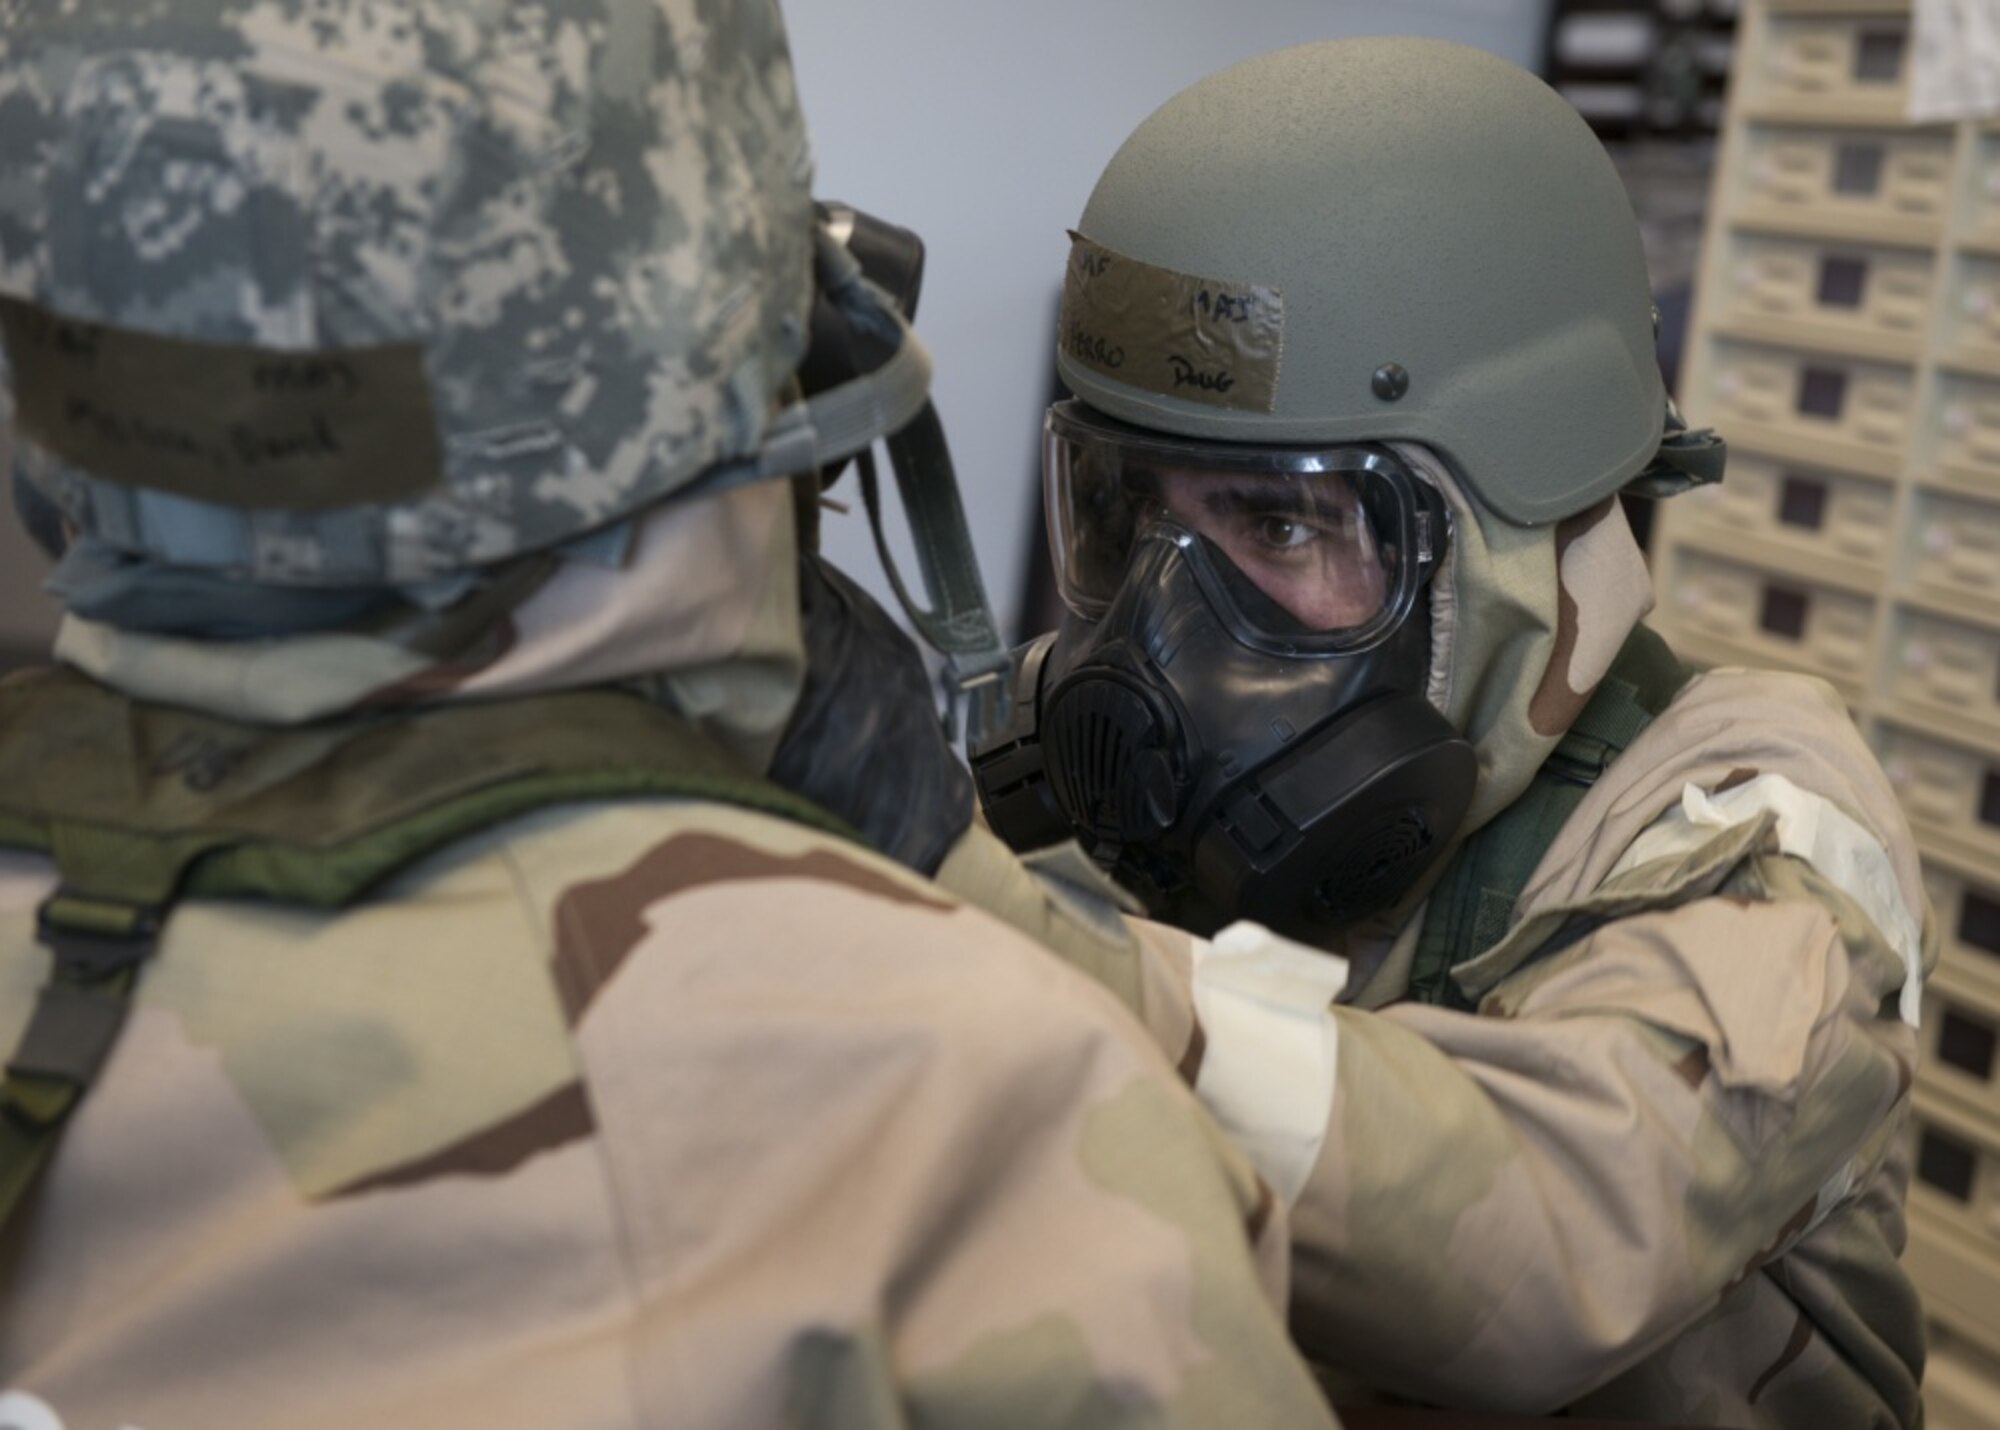 U.S. Air Force Maj. Doug Ferro, 118th Airlift Squadron pilot, 103rd Airlift Wing, Connecticut Air National Guard, checks Maj. David Monico’s Mission Oriented Protective Posture (MOPP) gear during a large-scale readiness exercise at Bradley Air National Guard Base, East Granby, Conn. March 5, 2020. The exercise tested the 103rd Airlift Wing’s ability to deploy to and sustain in a contested environment. (U.S. Air National Guard photo by Staff Sgt. Steven Tucker)